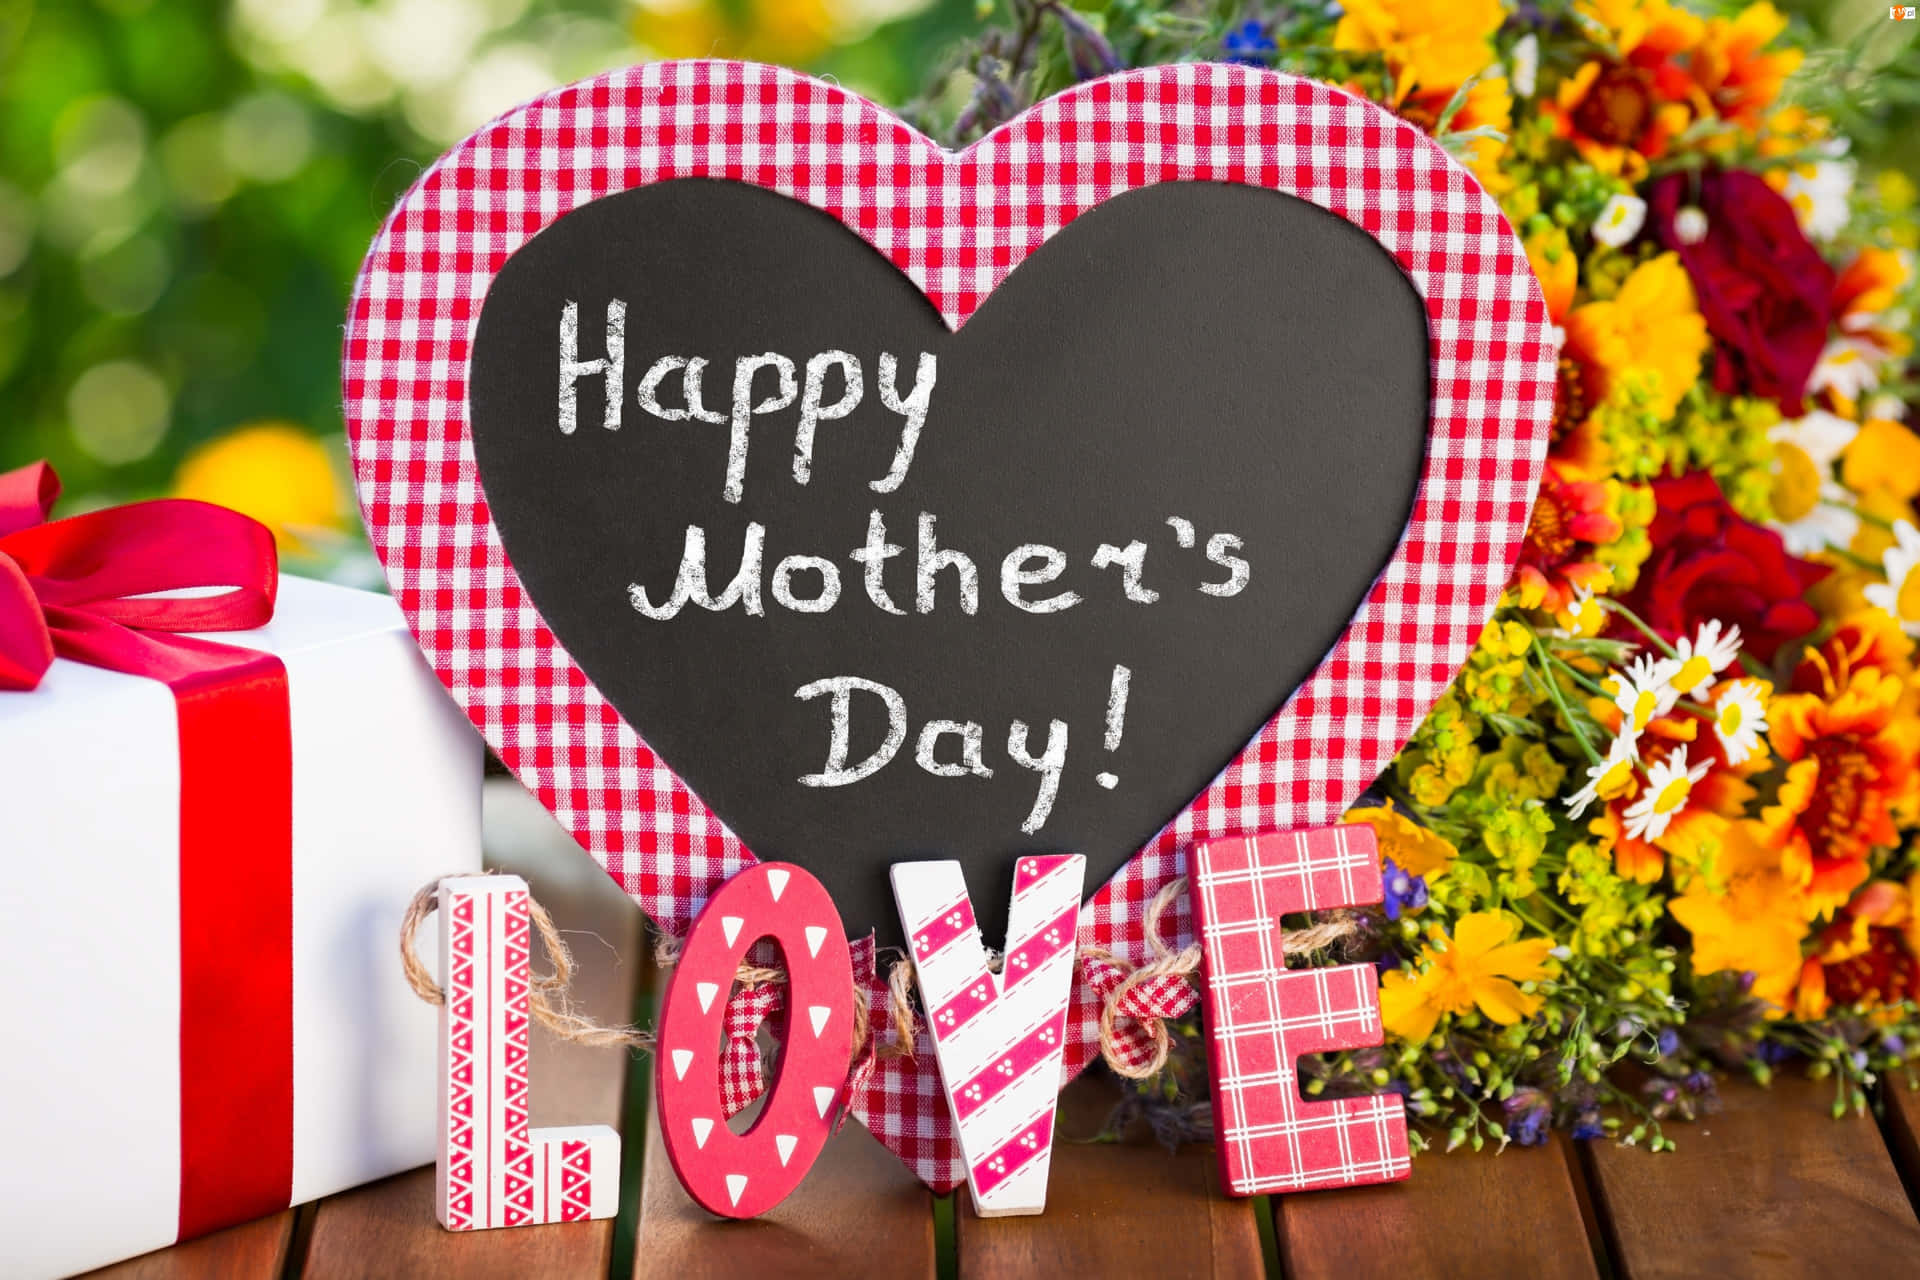 100+] Happy Mothers Day Hd Wallpapers | Wallpapers.com